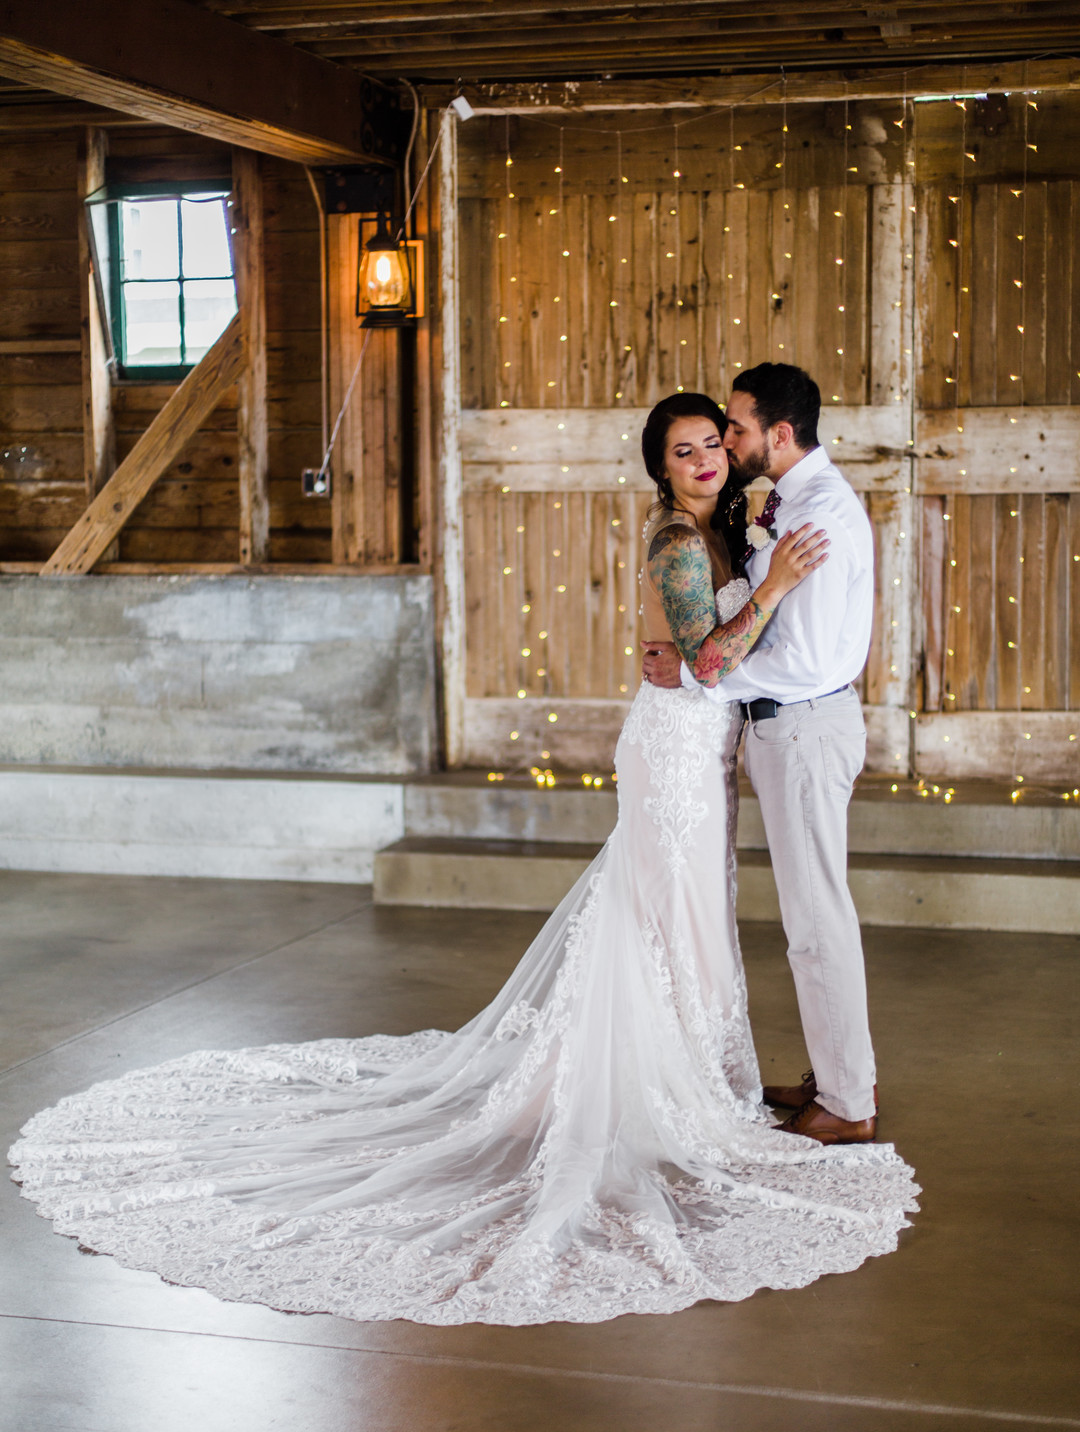 Rustic barn wedding inspiration captured by Grace Rios Photography. See more fall wedding ideas at CHItheeWED.com!